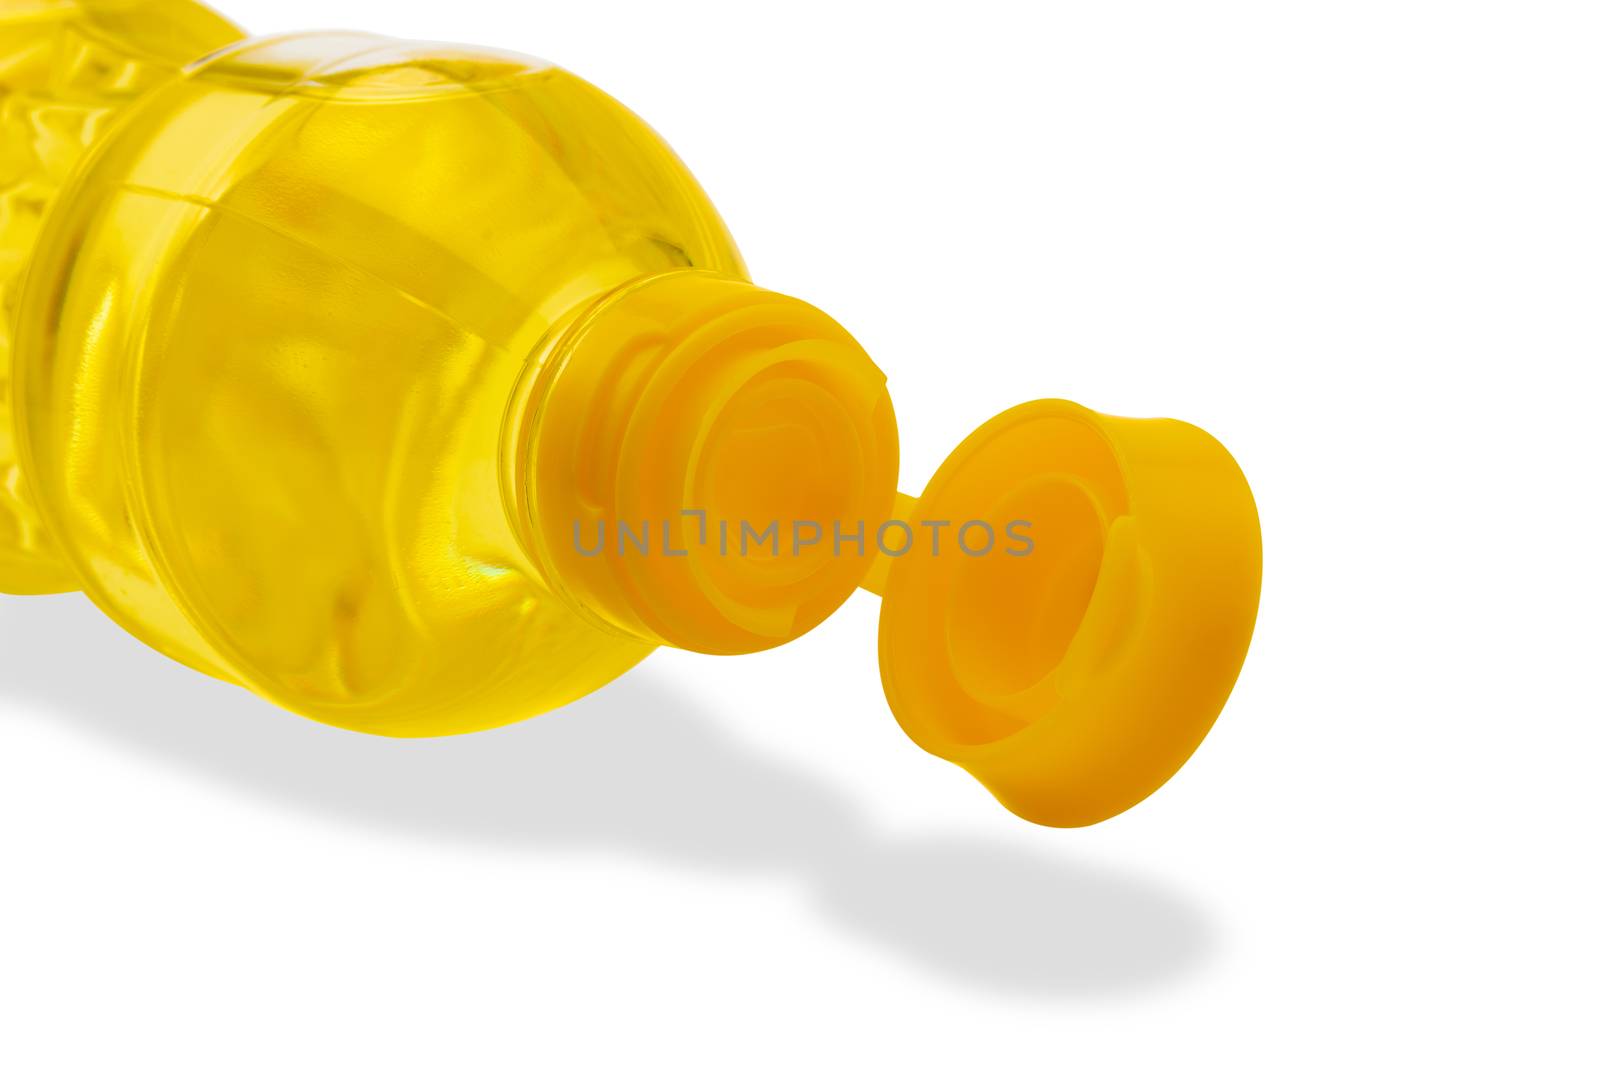 Vegetable oil in plastic bottle isolated on a white background